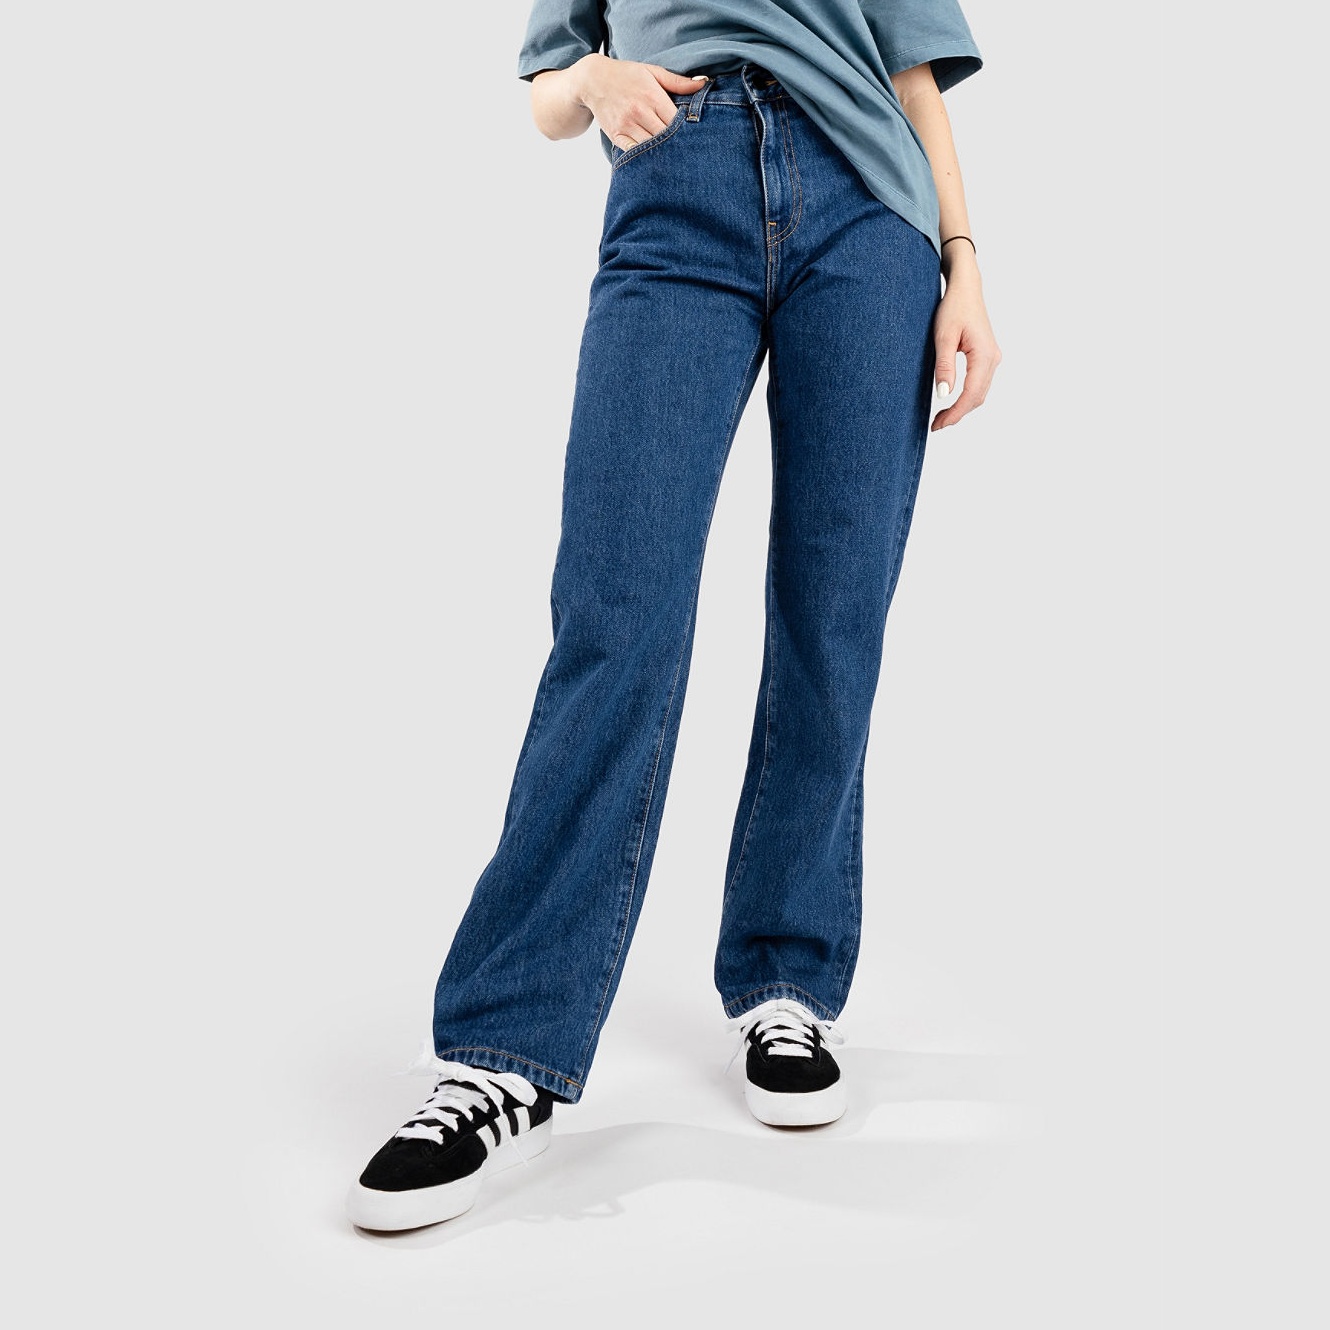 Carhartt Wip Noxon Stone Washed Blue Jeans Femme